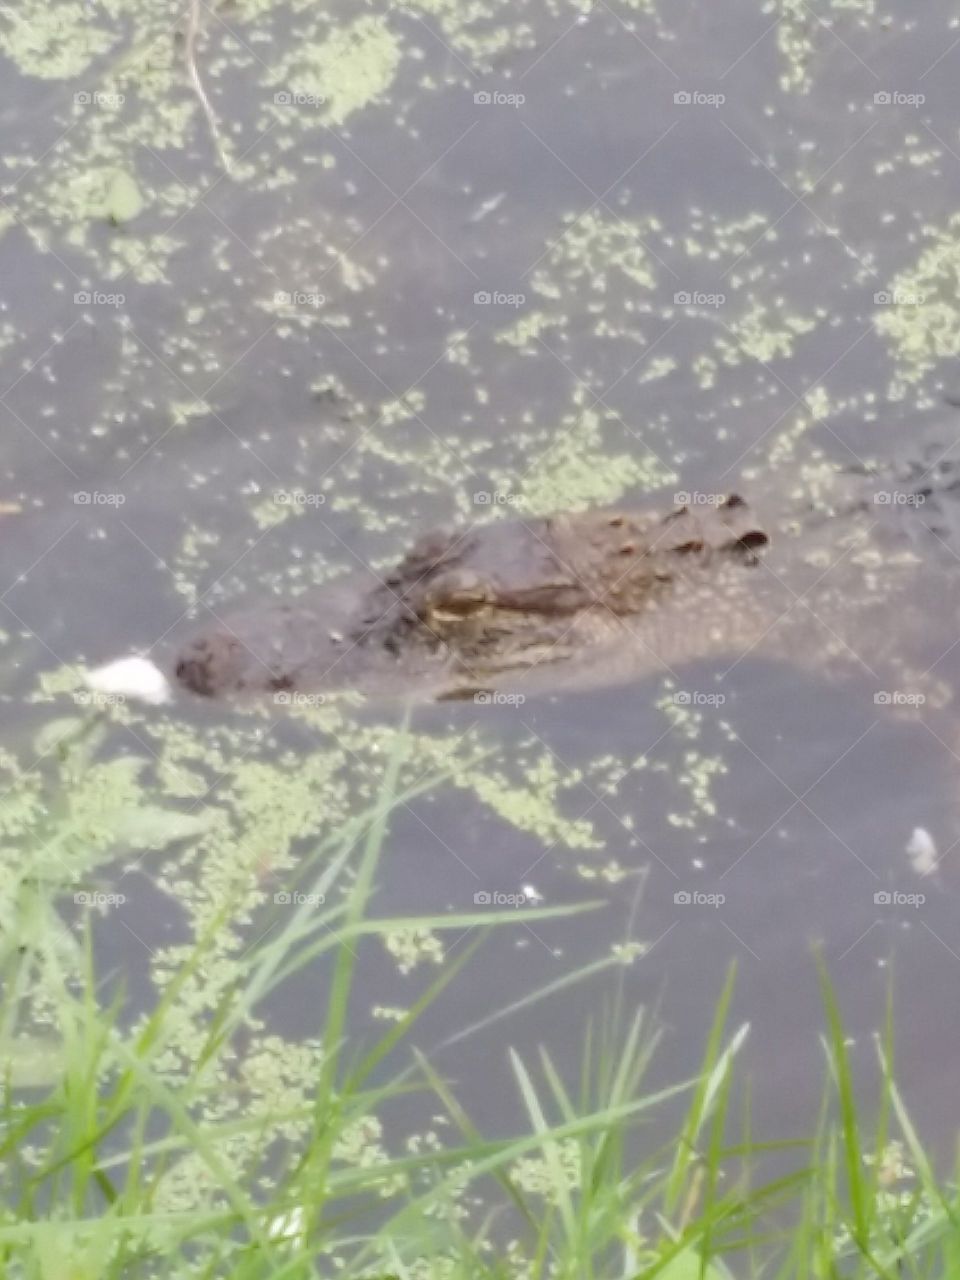 Louisiana Alligator. This gator crossed the pond in a hurry looking for a handout.